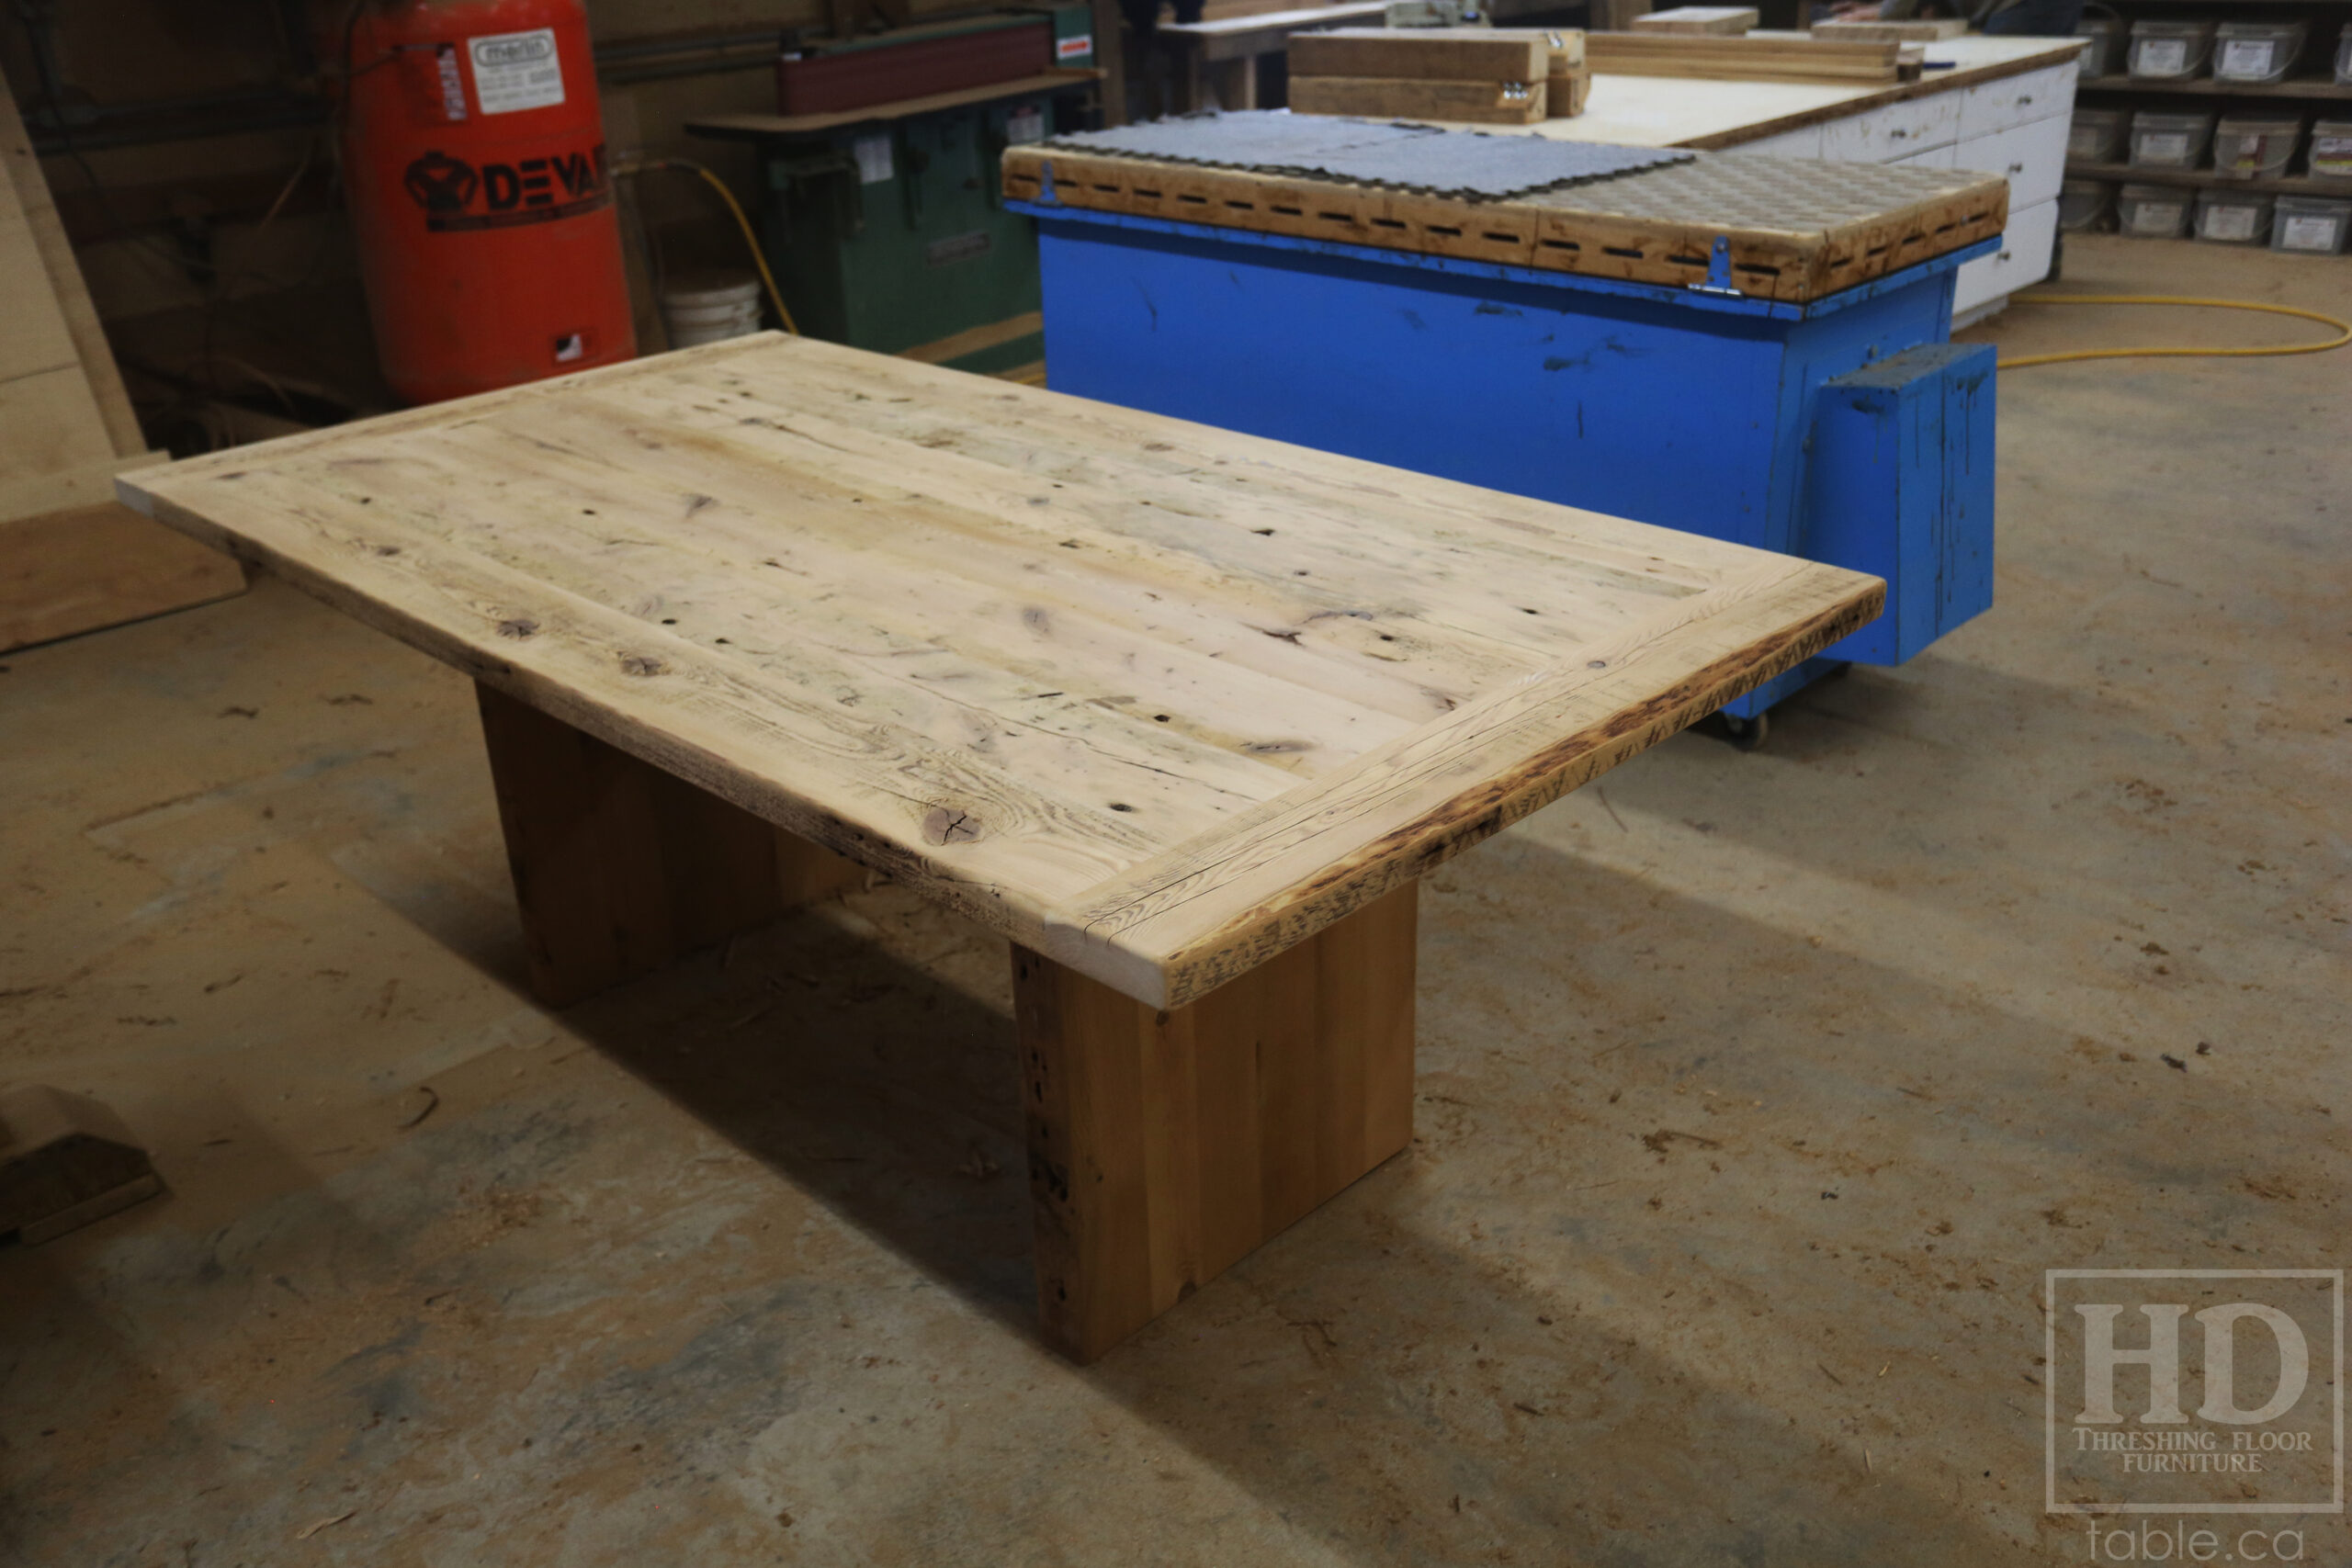 6.5' Ontario Barnwood Table we made for a Brantford Home - 42" wide - Modern Plank Posts Base - Old Growth Hemlock Threshing Floor Construction - Original edges & distressing maintained - Bleached Option - Premium epoxy + satin polyurethane finish - www.table.ca